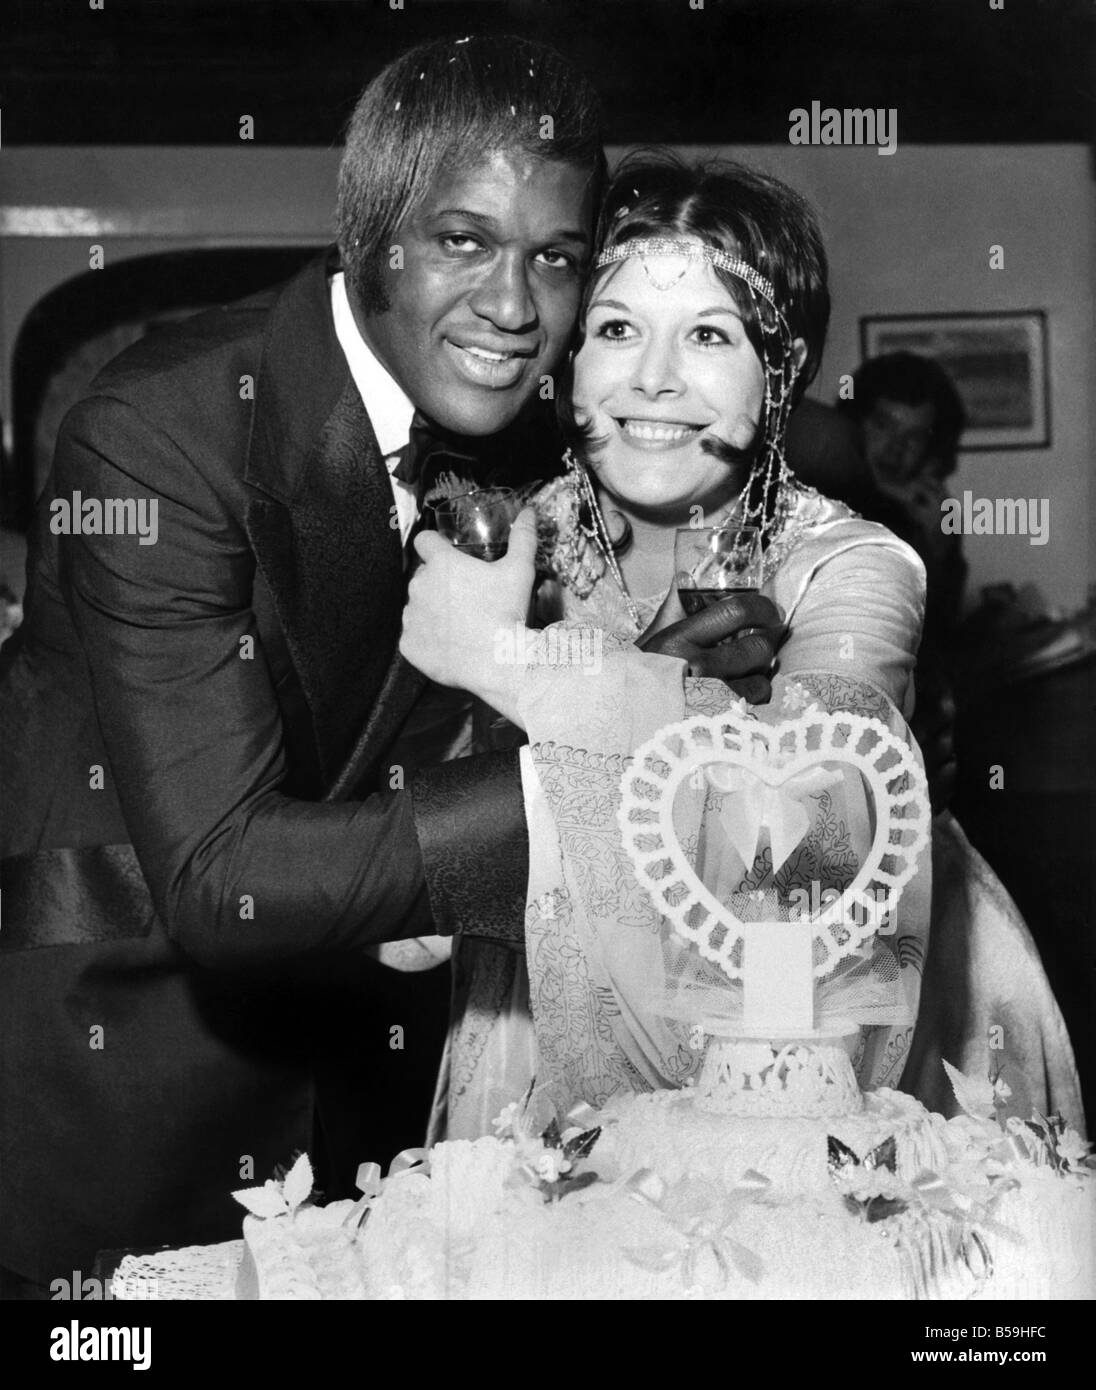 Singer Lovelace Watkin seen embracing his new bride Anna Maria Fitzsimmons who is expecting Lovelaces baby in three weeksMar. 19 Stock Photo